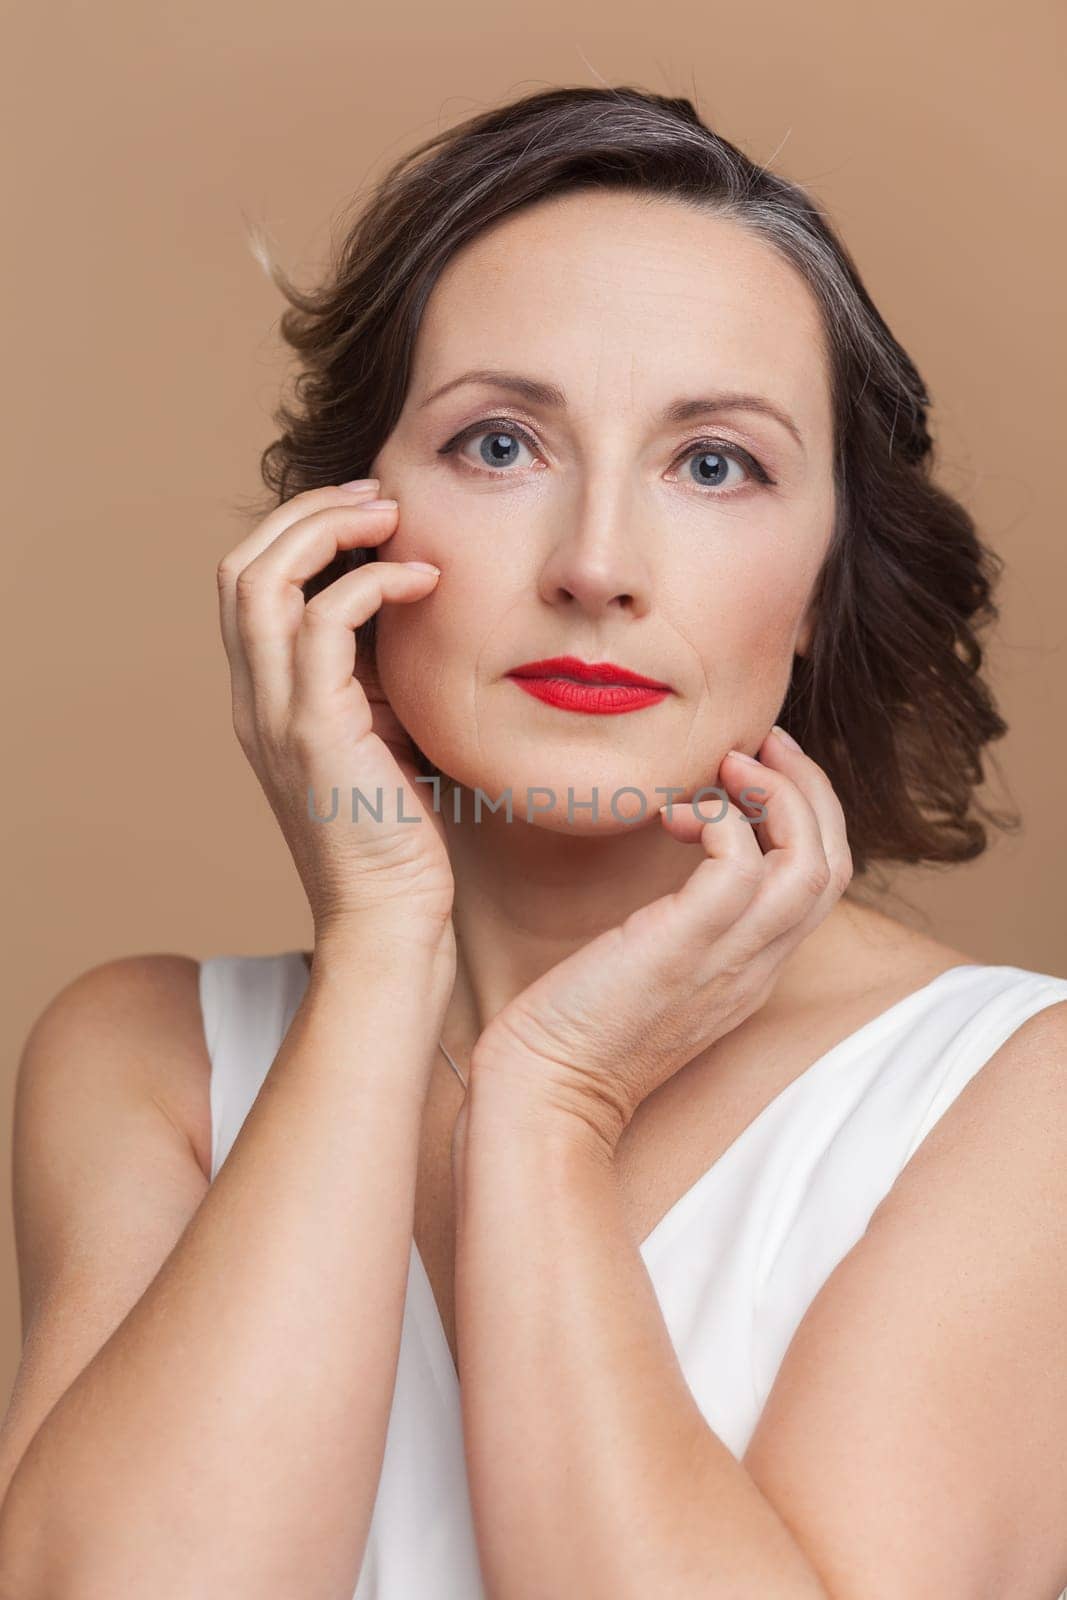 Closeup portrait of calm attractive beautiful middle aged woman with wavy hair and makeup, looking at camera, wearing white dress. Indoor studio shot isolated on light brown background.